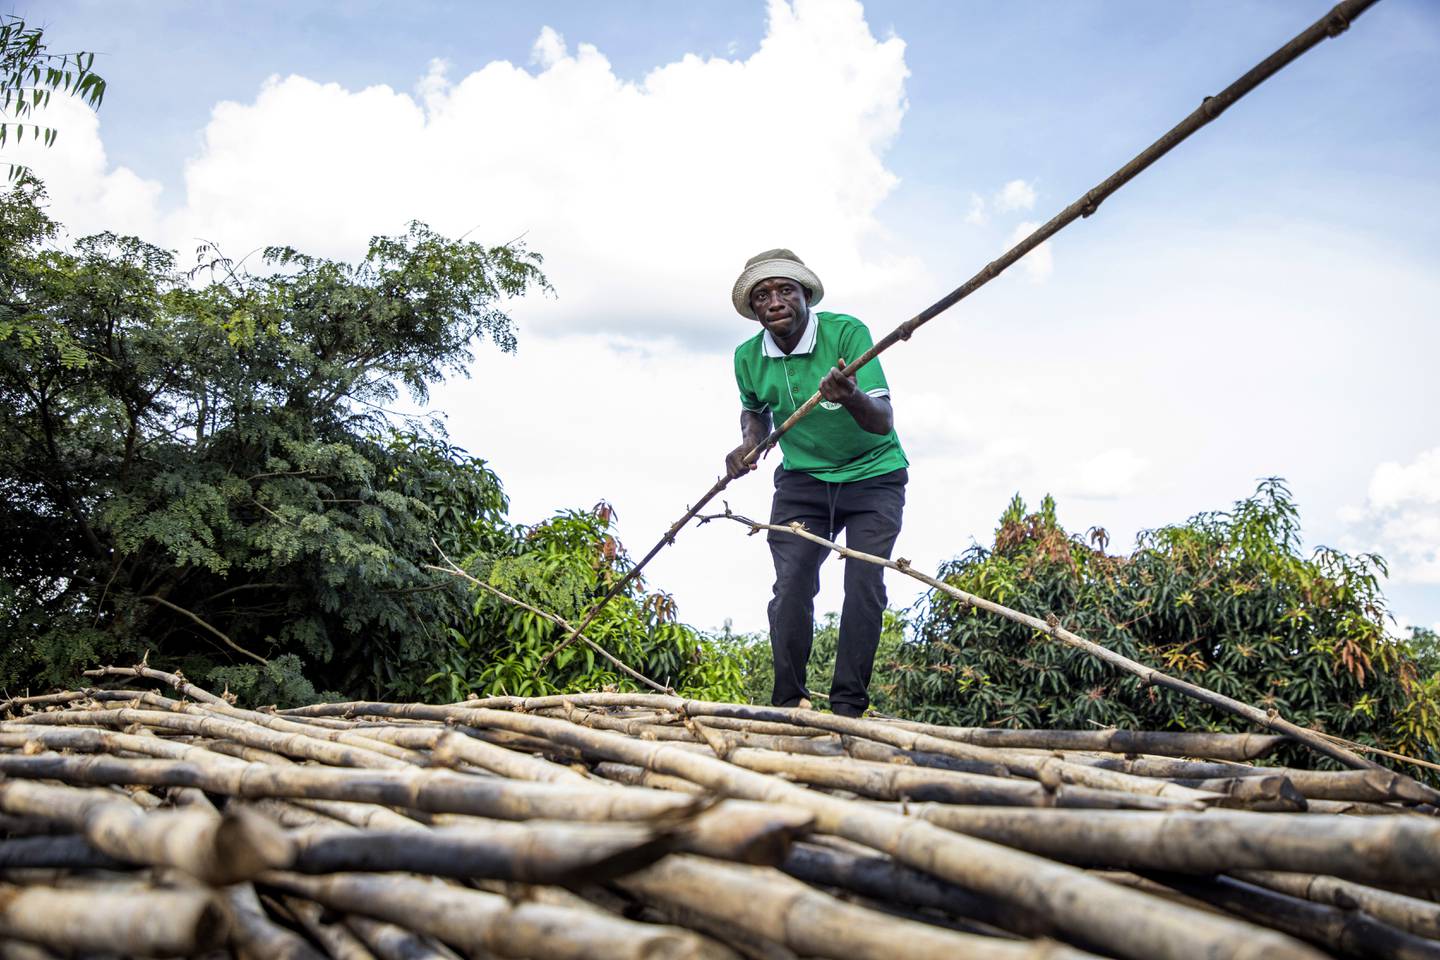 Joseph Katumba, a caretaker at Kitara Farm, works near Mbarara, Uganda, on March 8, 2024.  Katumba said the property has become something of a demonstration farm for people who want to learn more about bamboo.